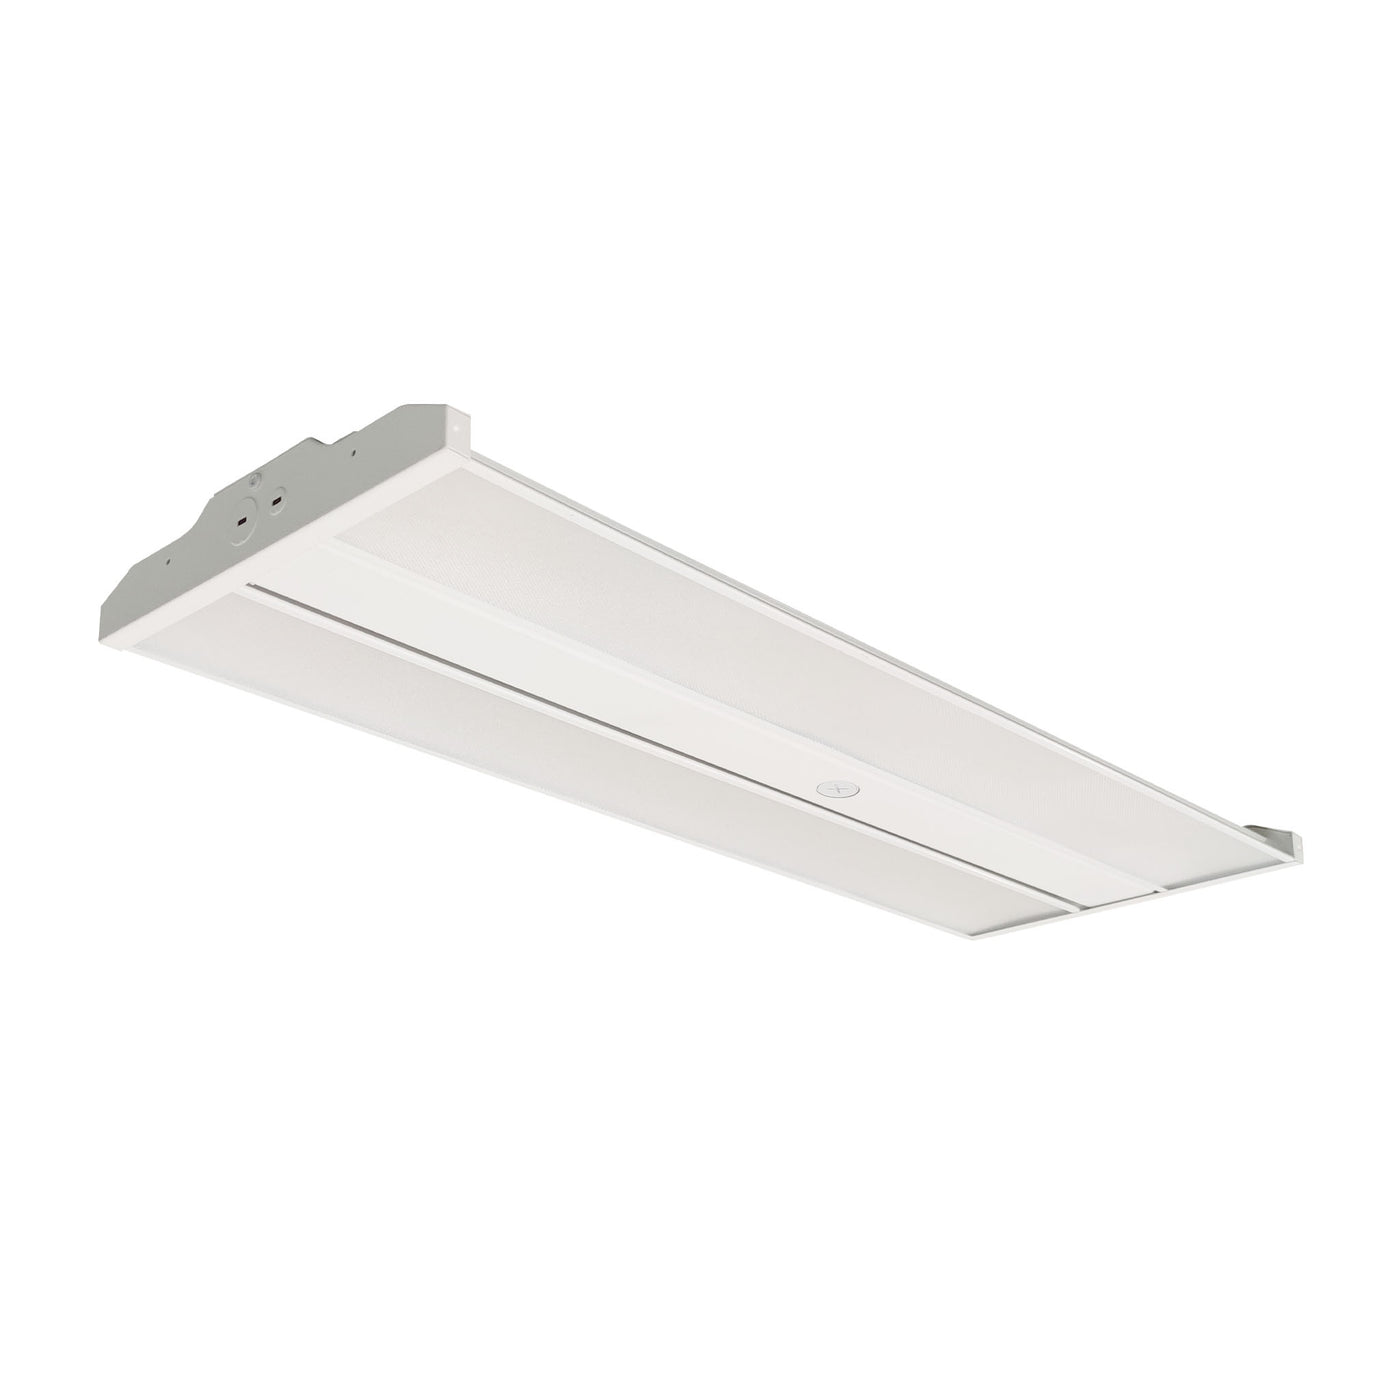 Low Profile Linear High Bay Fixture, 36000 Lumen Max, CCT Selectable, 120-277V